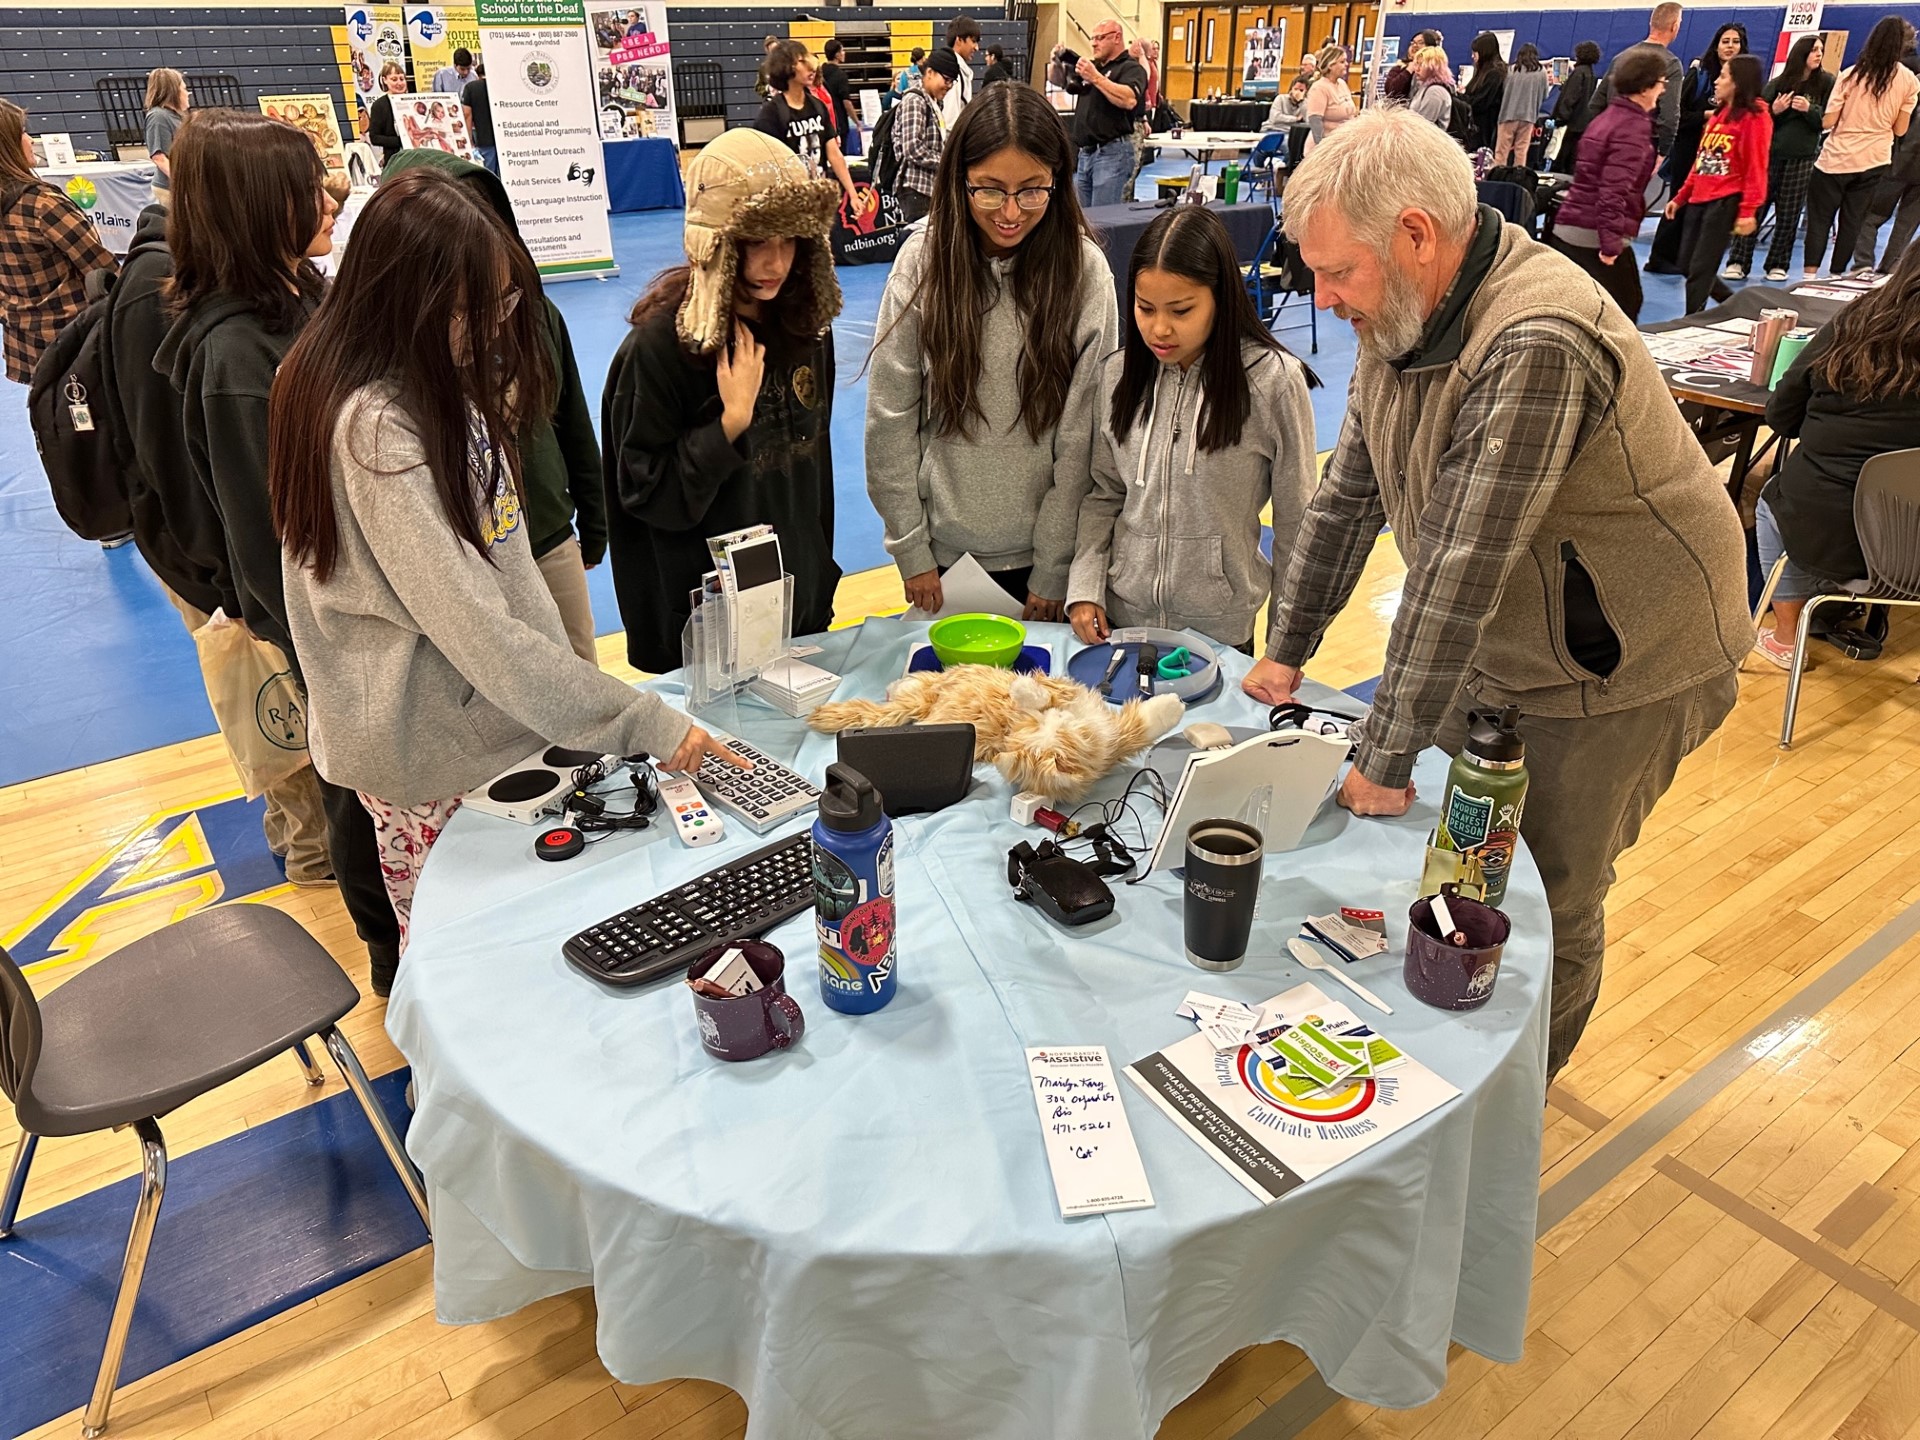 ND Assistive Executive Director Mike Chaussee leans over a circlular table at a tabling event at Standing Rock High School in Ft. Yates. A group of students are gathered around listening to Mike explain assistive technology items on display.